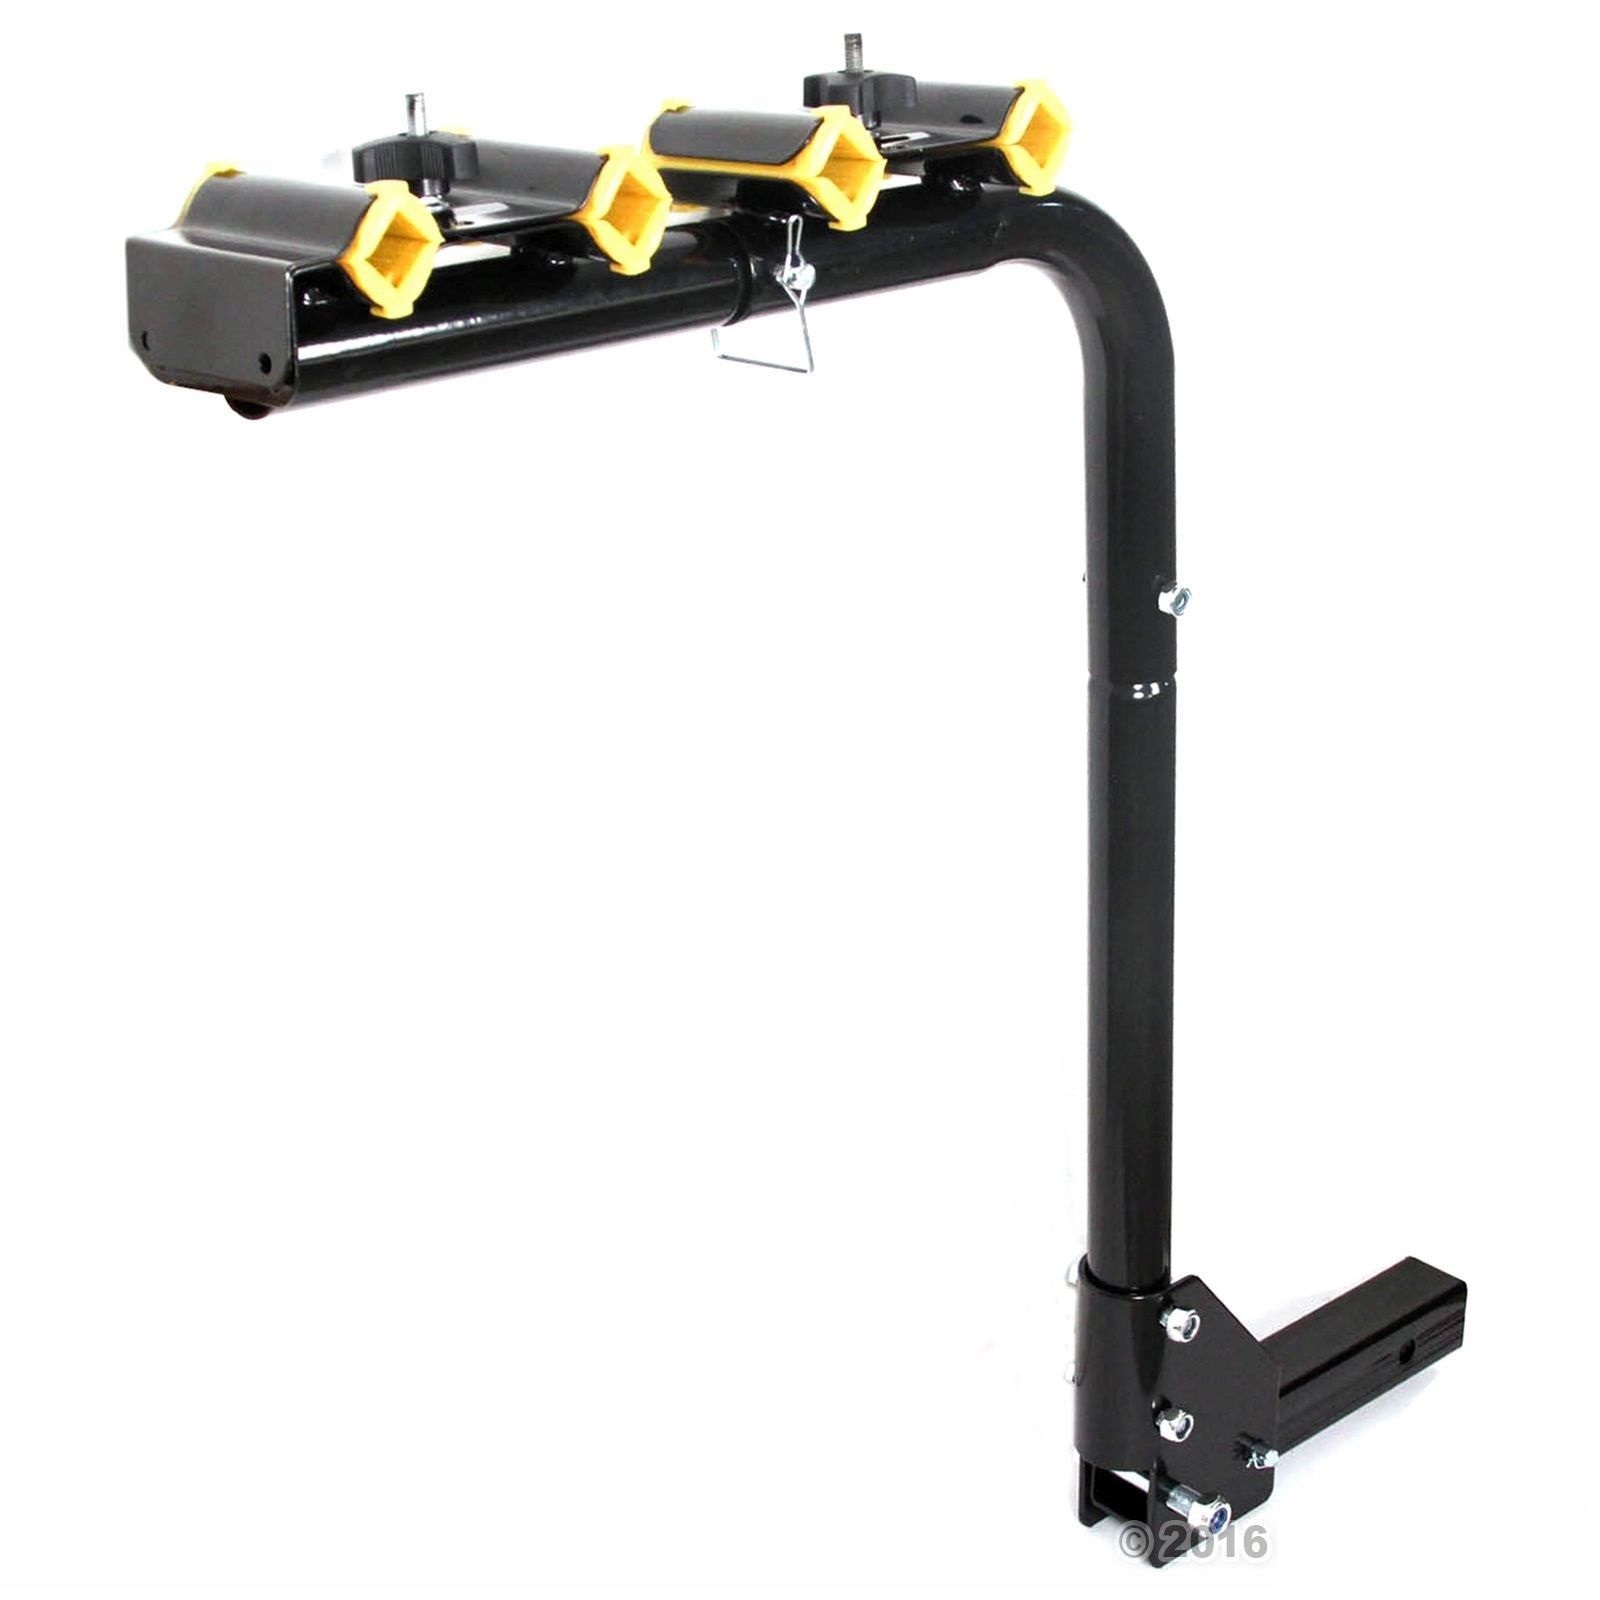 IKURAM 4-Bike Hitch Mount Bicycle Rack Foldable Fit 2 Inch Hitch Receiver 